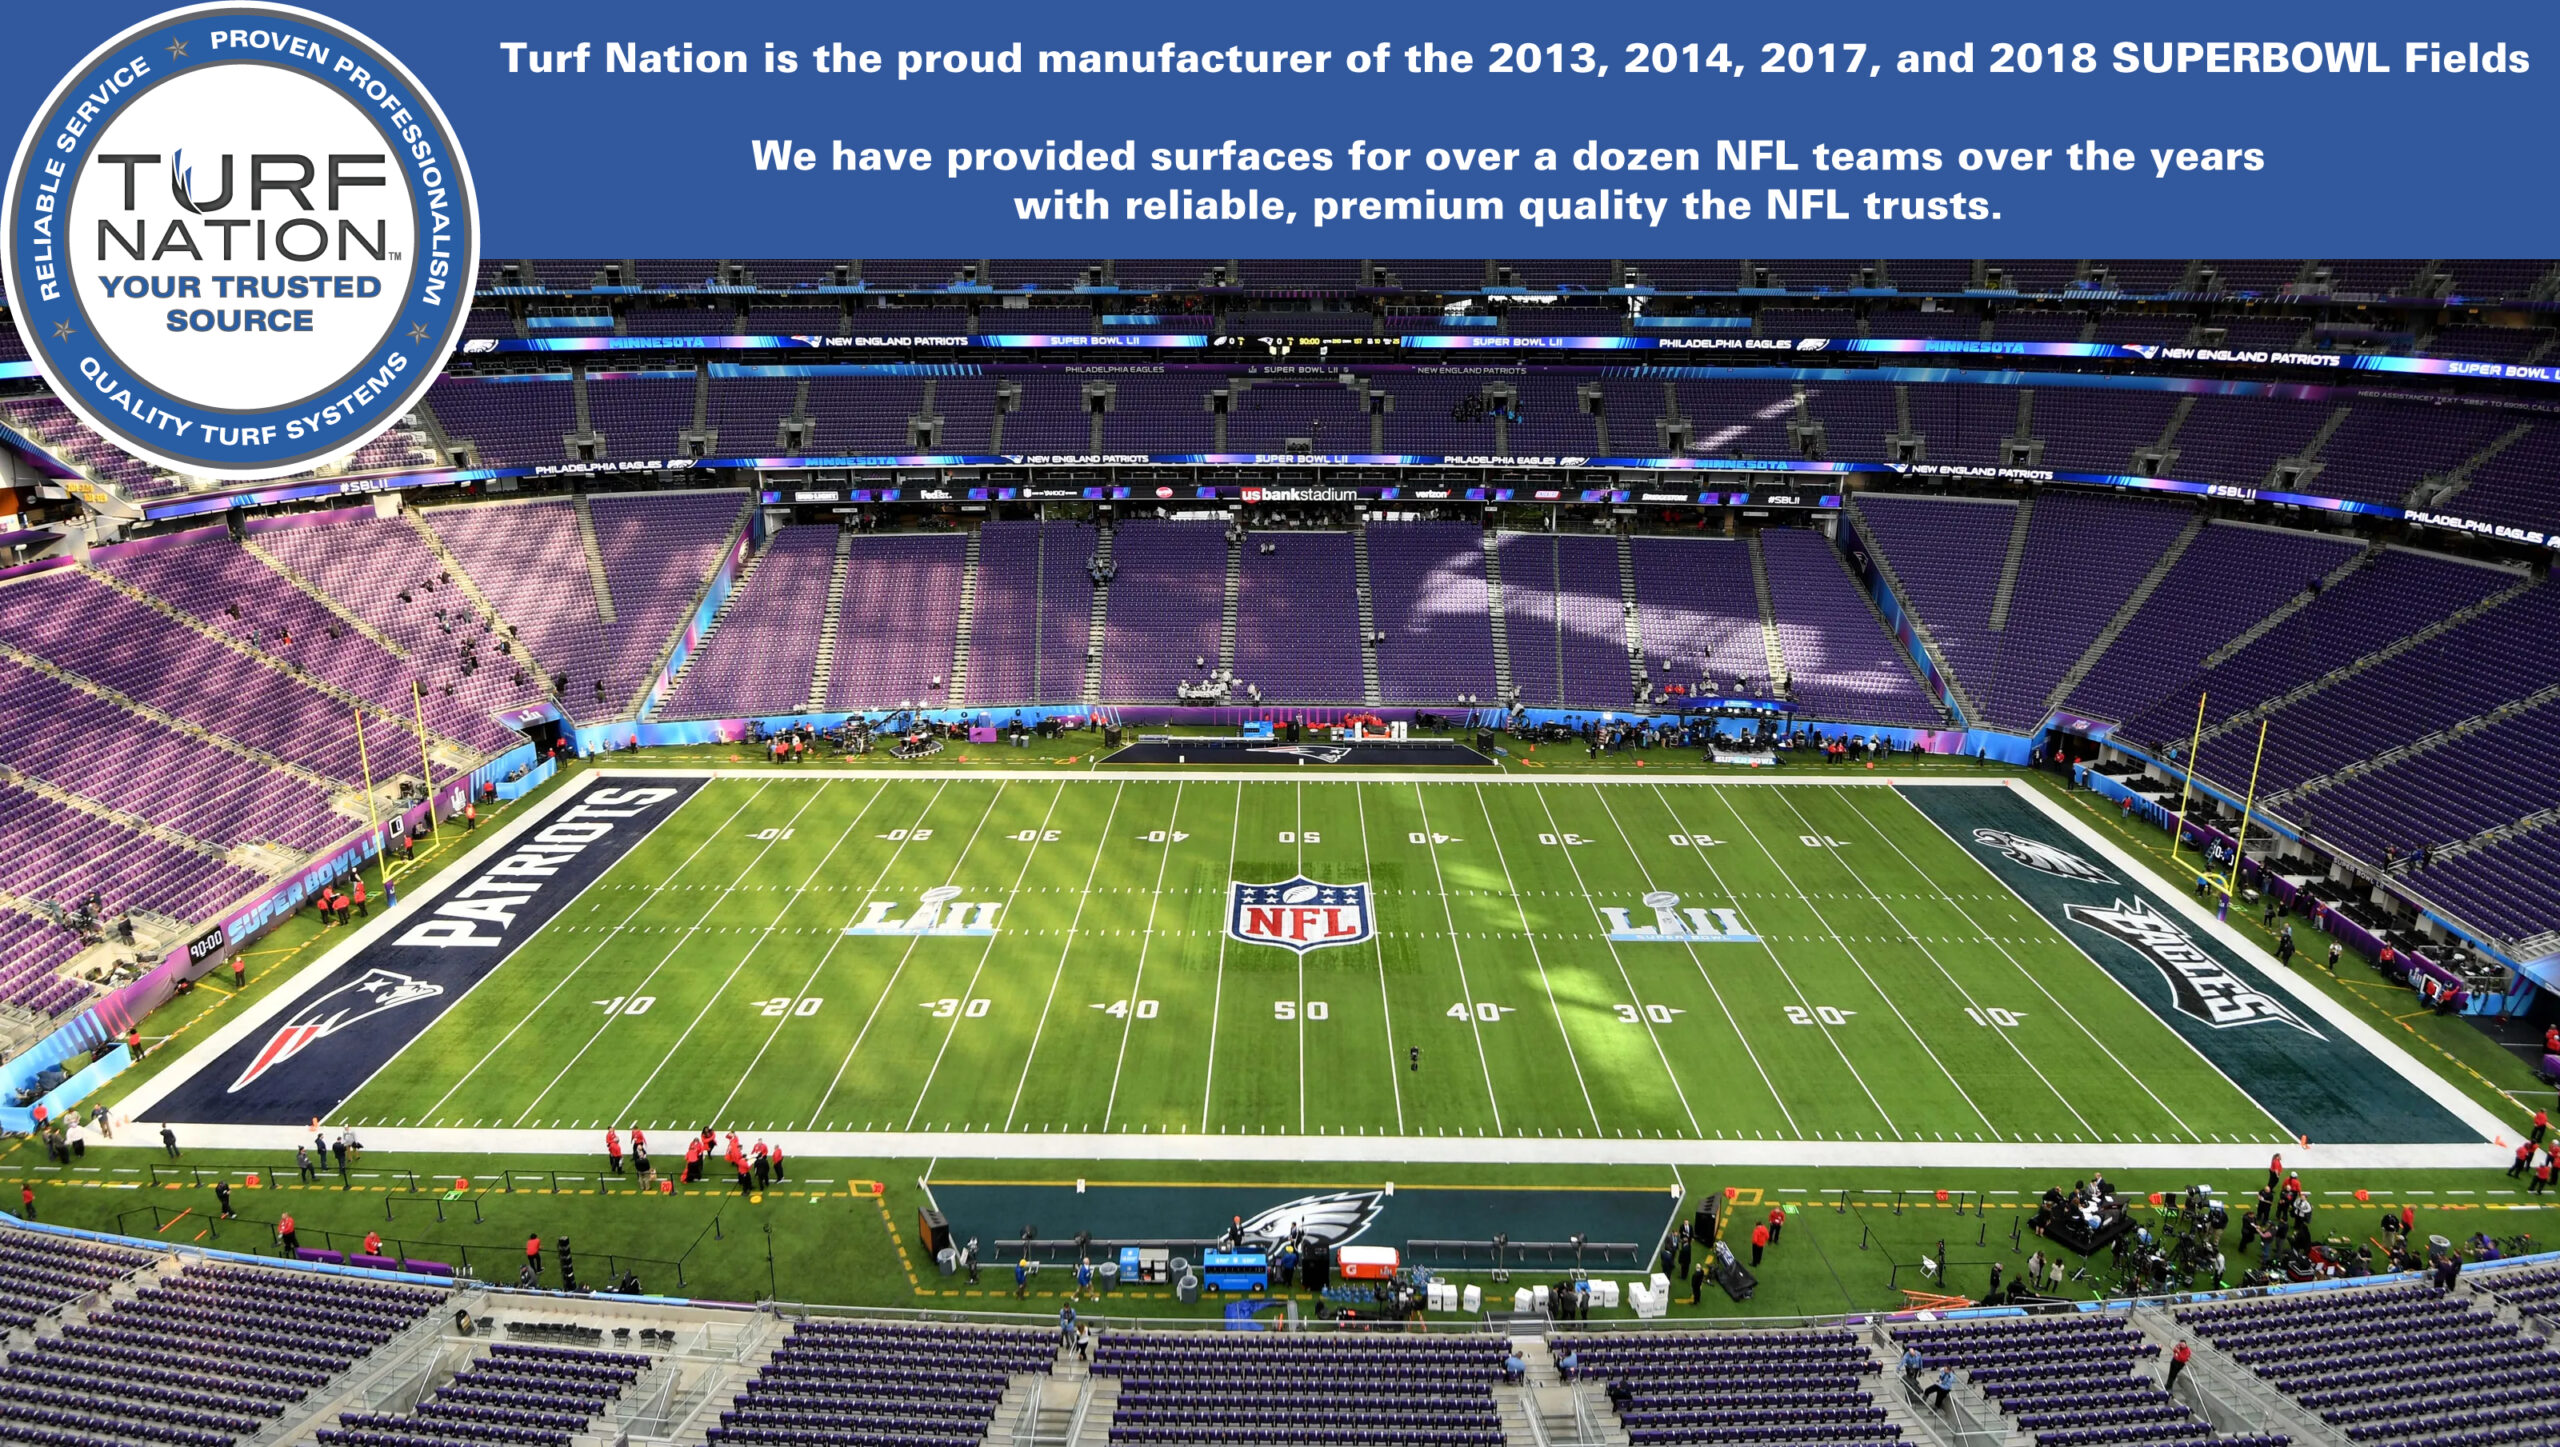 Turf Nation's 2018 Super bowl Field for the New England Patriots. Turf Nation proudly manufactured the 2013, 2014, 2017, and 2018 Super Bowl Fields.